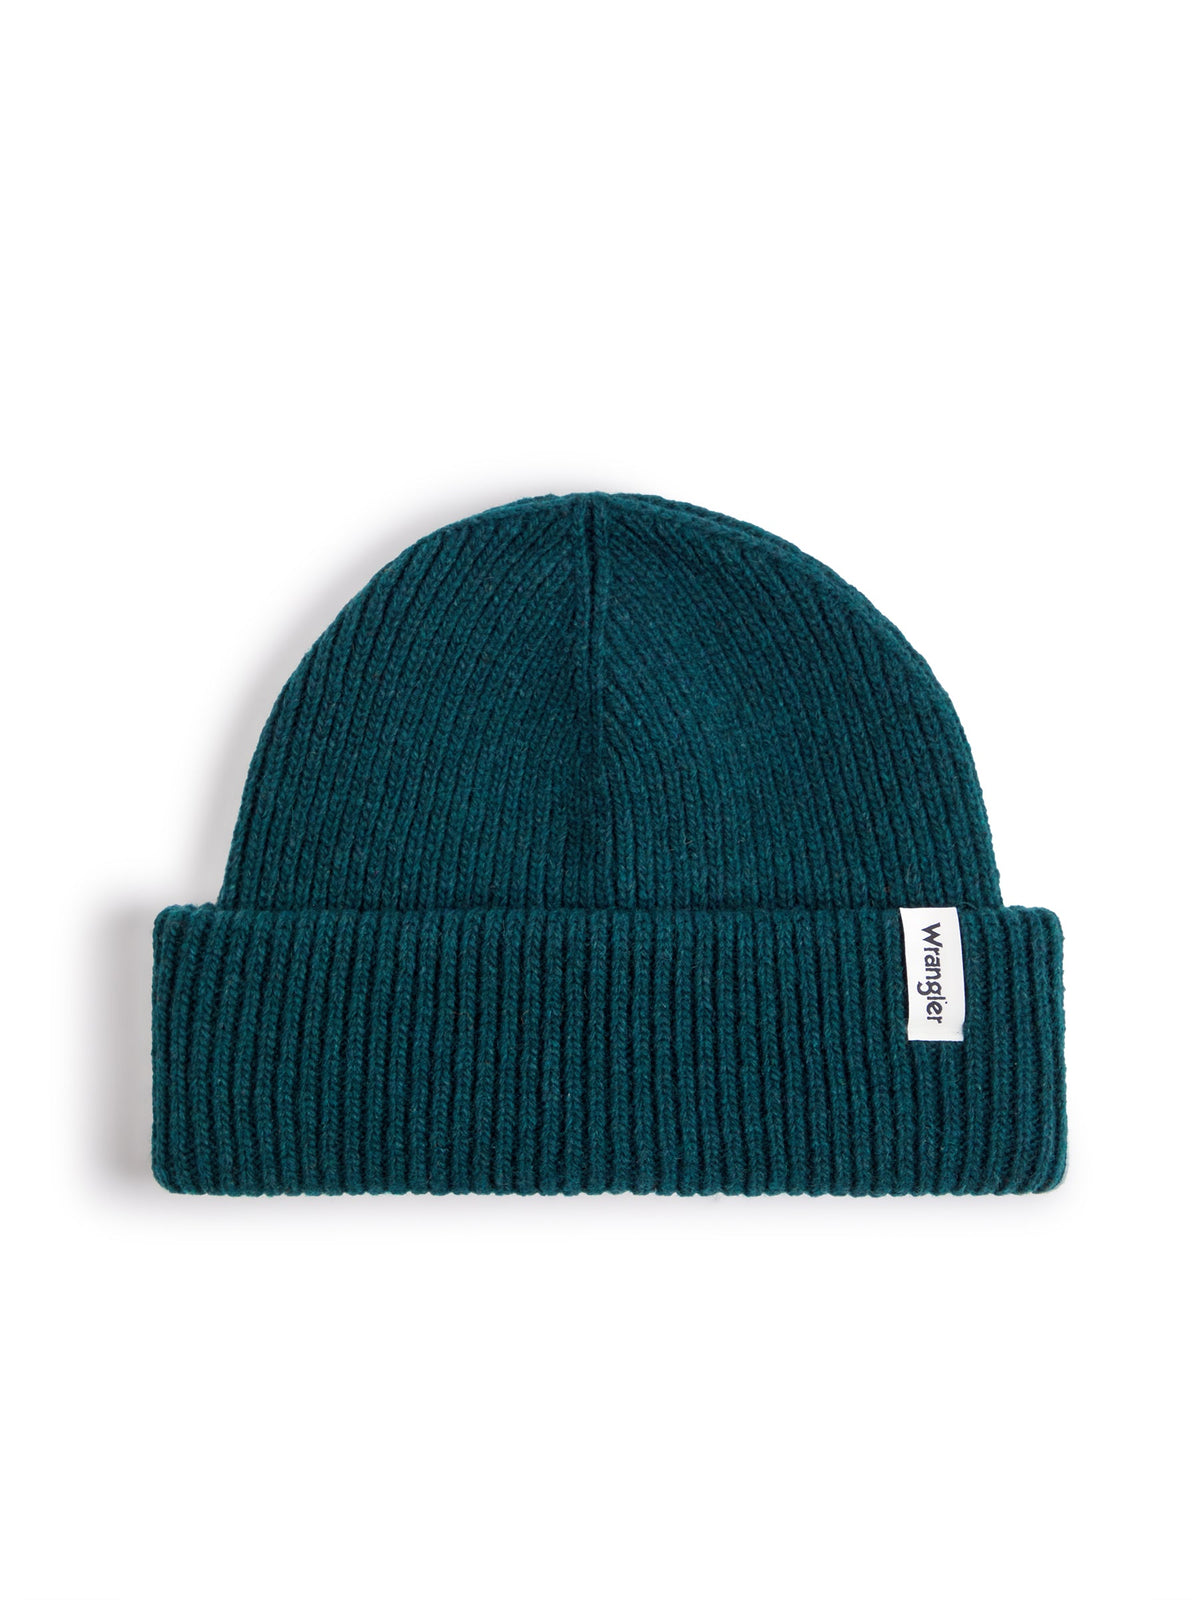 Sign Off Beanie in Deep Teal Green